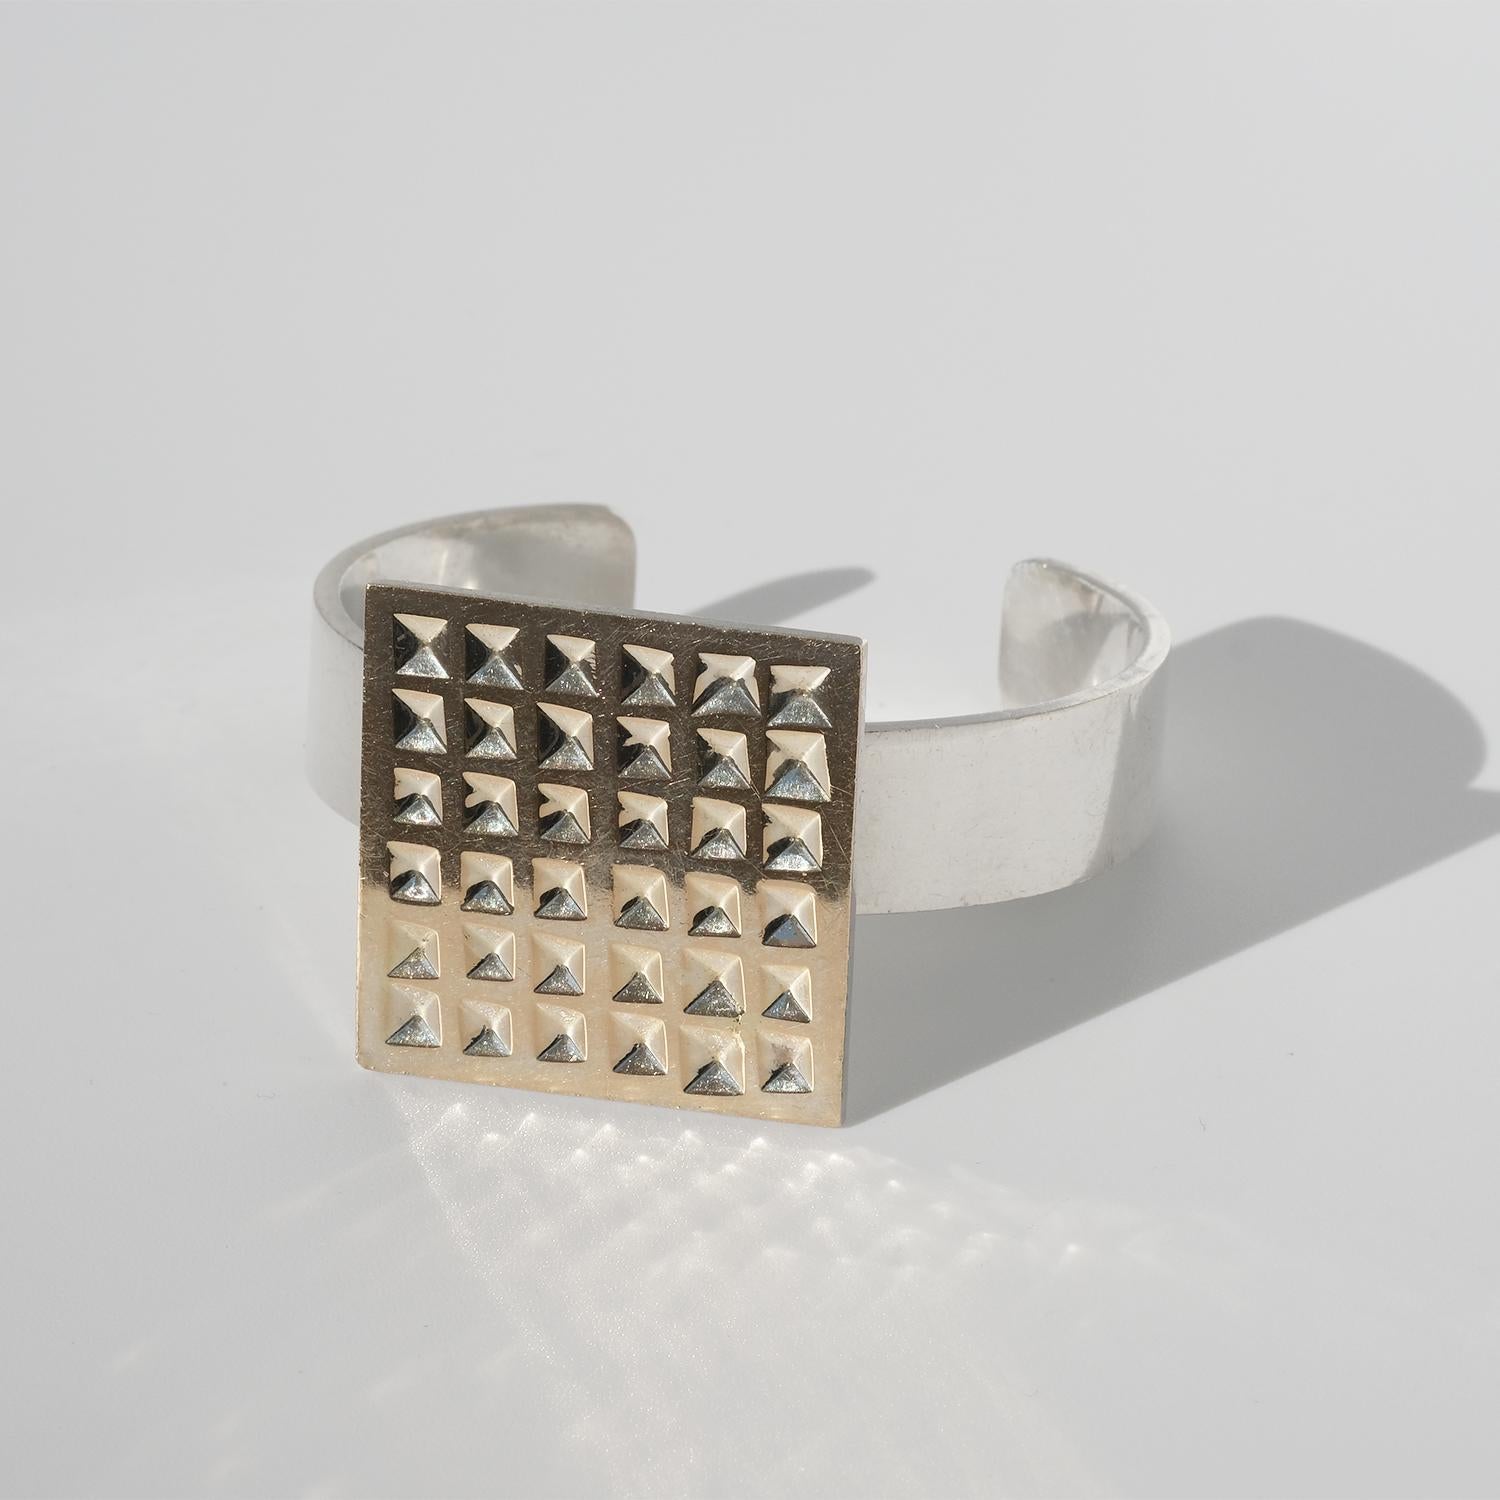 This sterling silver cuff bracelet has gold on its upper part. The fixed cuff bracelet is excellent with its firm, waffled adornment and geometrically curved arms. This bracelet is fun and elegant at the same time. It will give its wearer